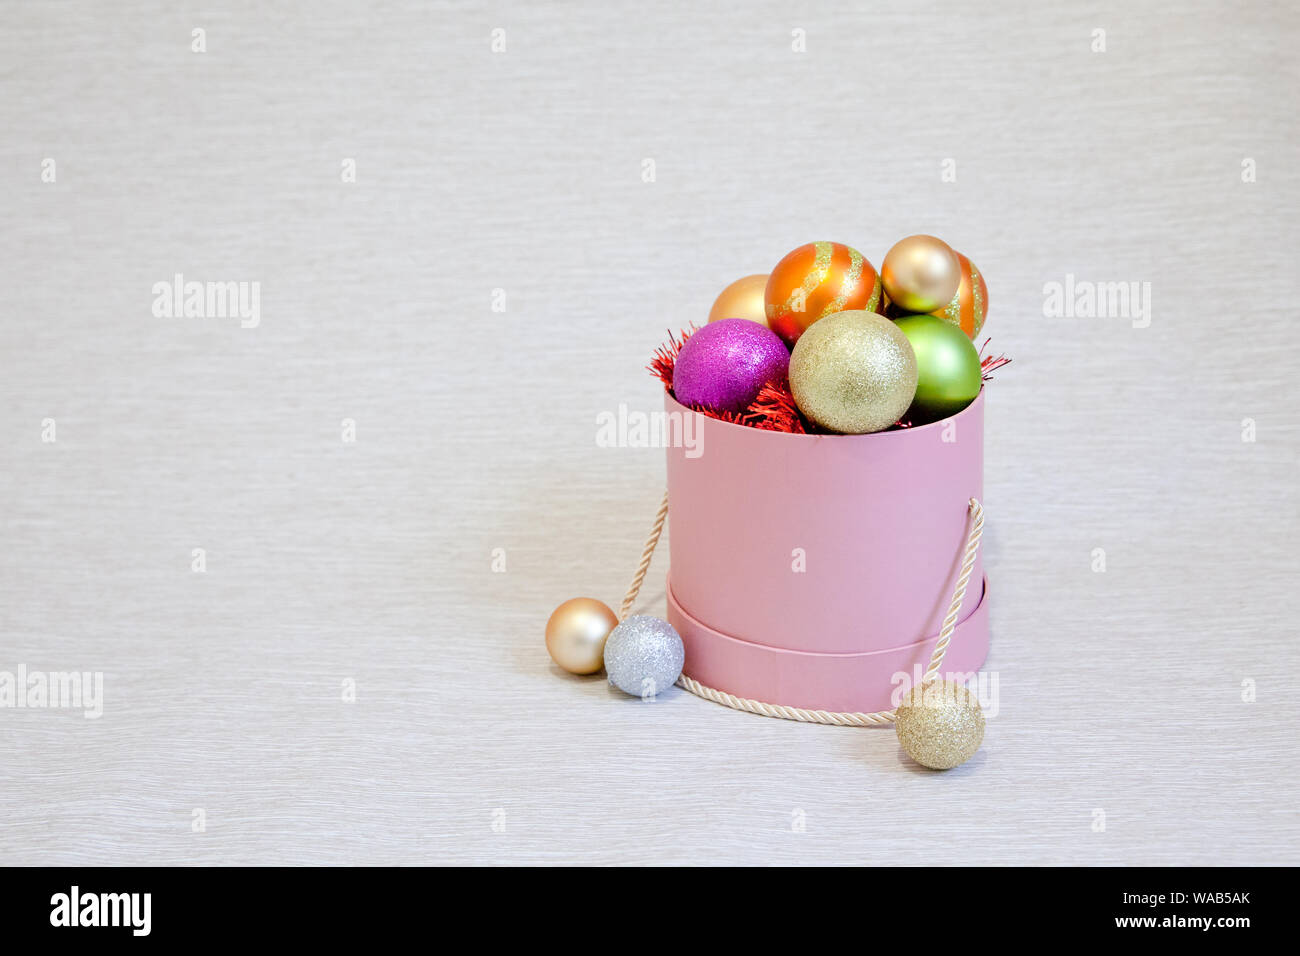 Box with Christmas balls. Pink box with christmas decorations. Colorful balloons. Stock Photo